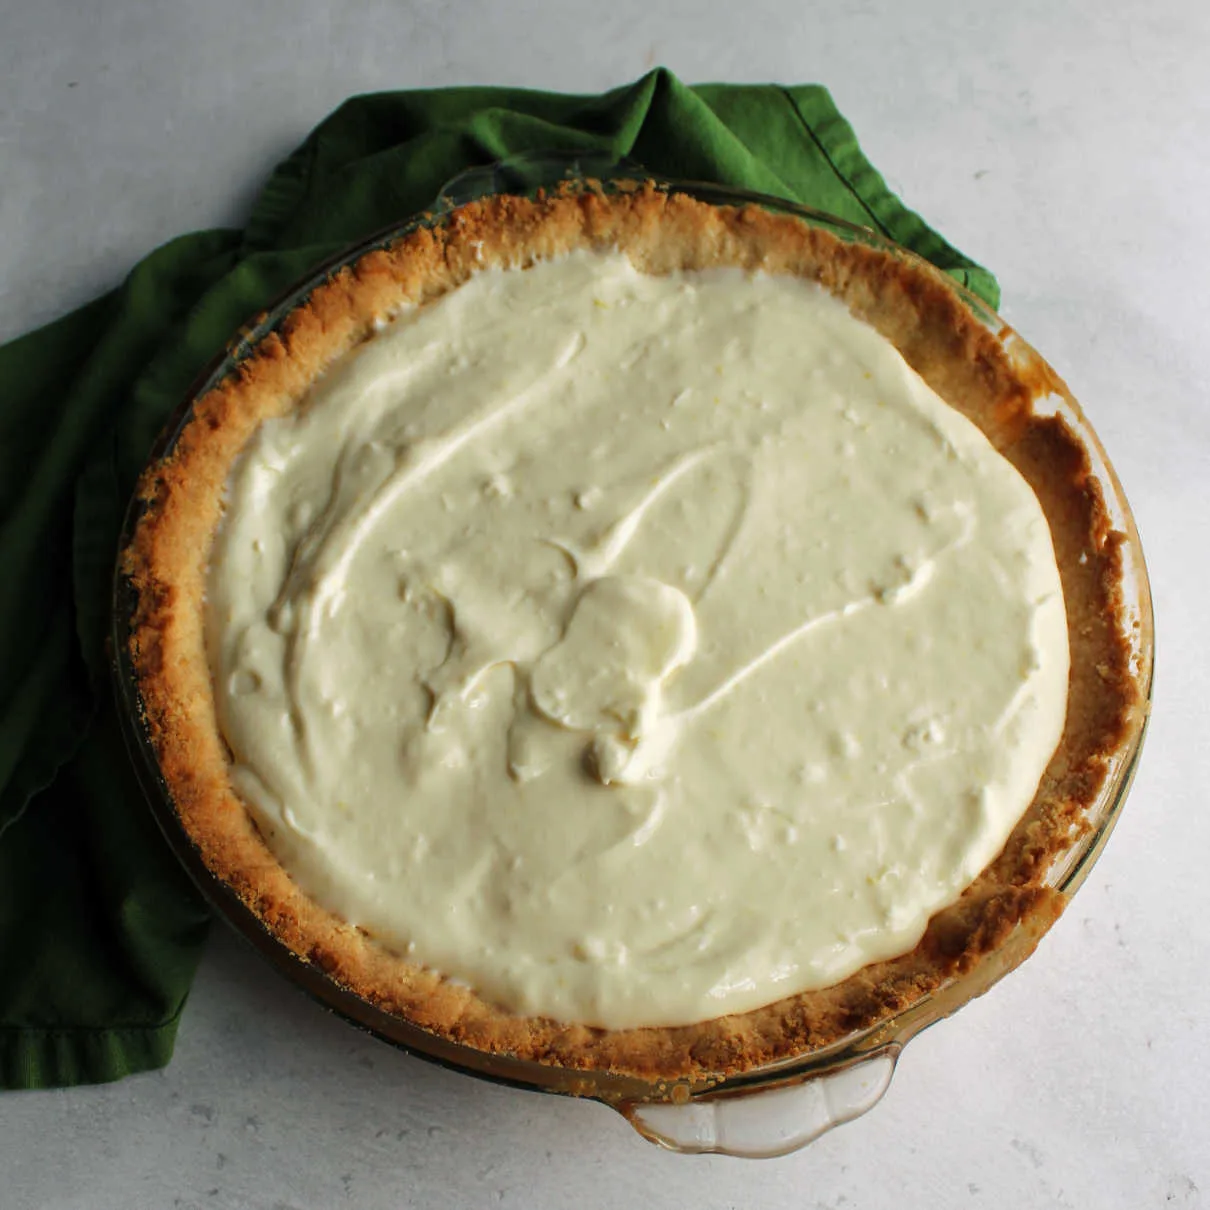 Lemon filling spread into cooled cookie pie crust.